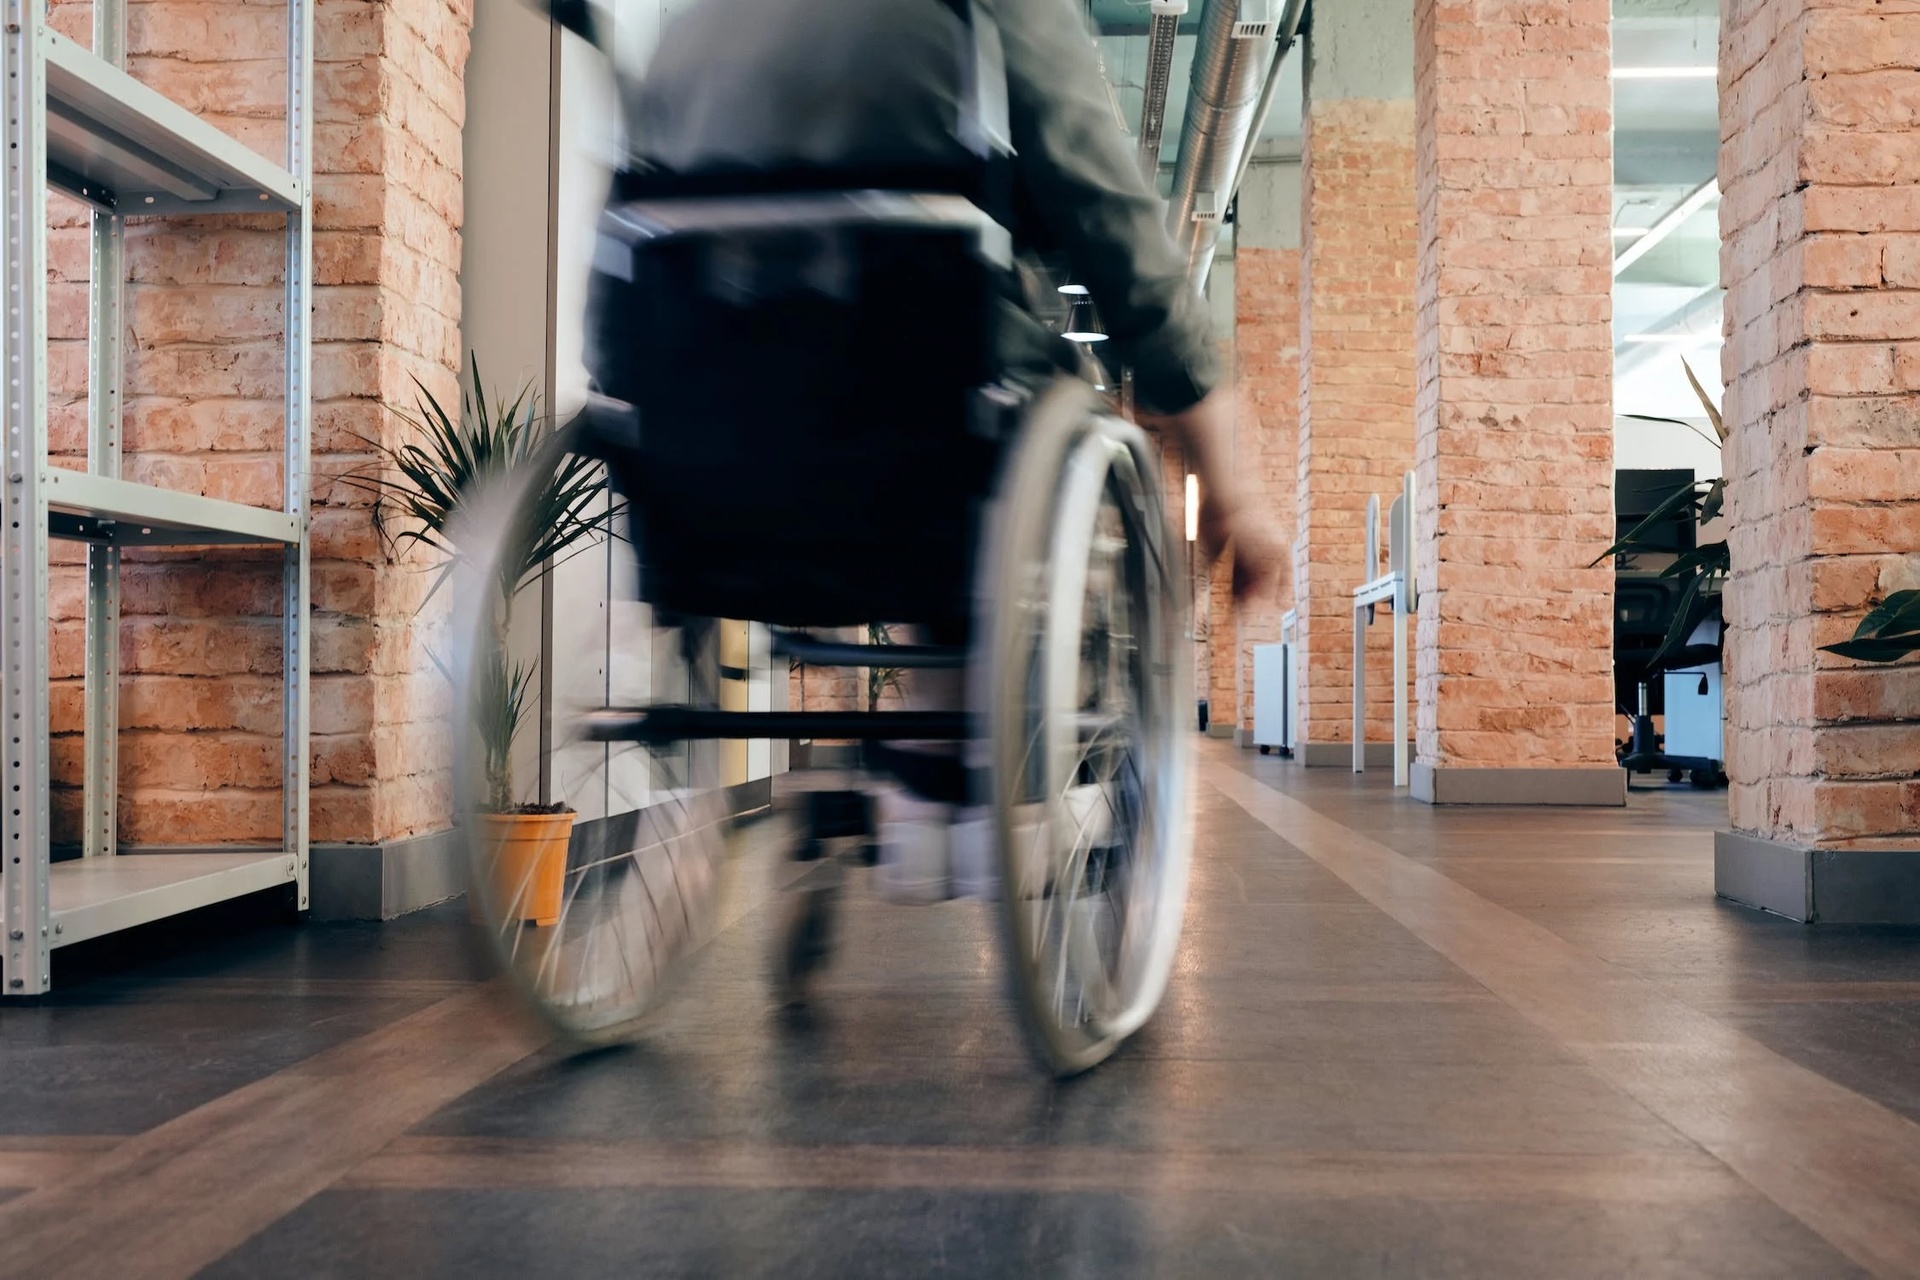 man in wheelchair in building meeting accessibility requirements